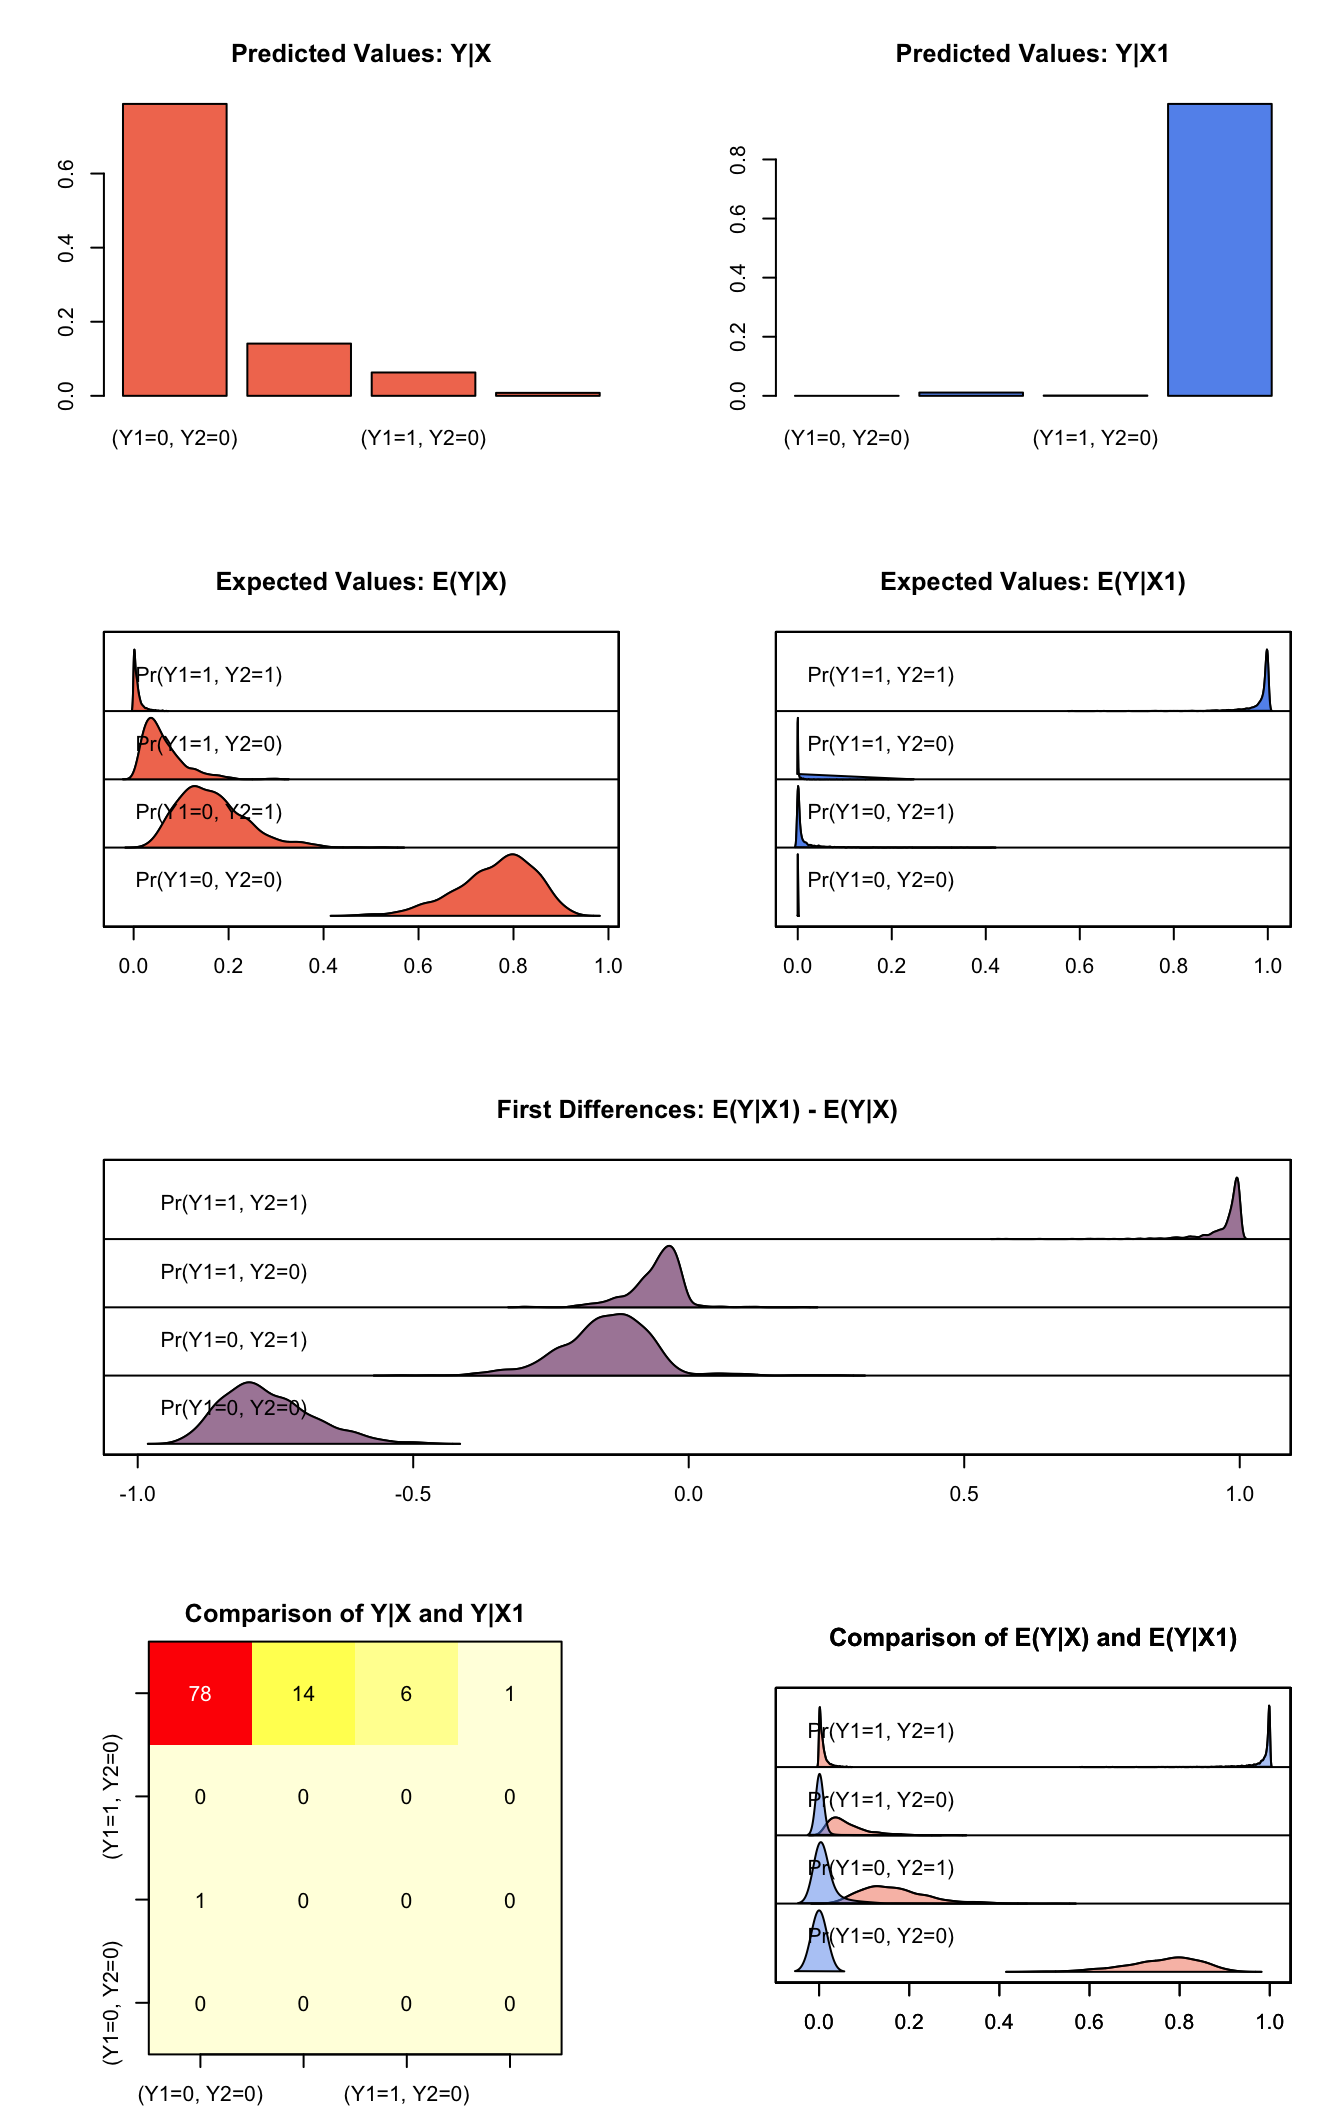 Graphs of Quantities of Interest for Bivariate Probit